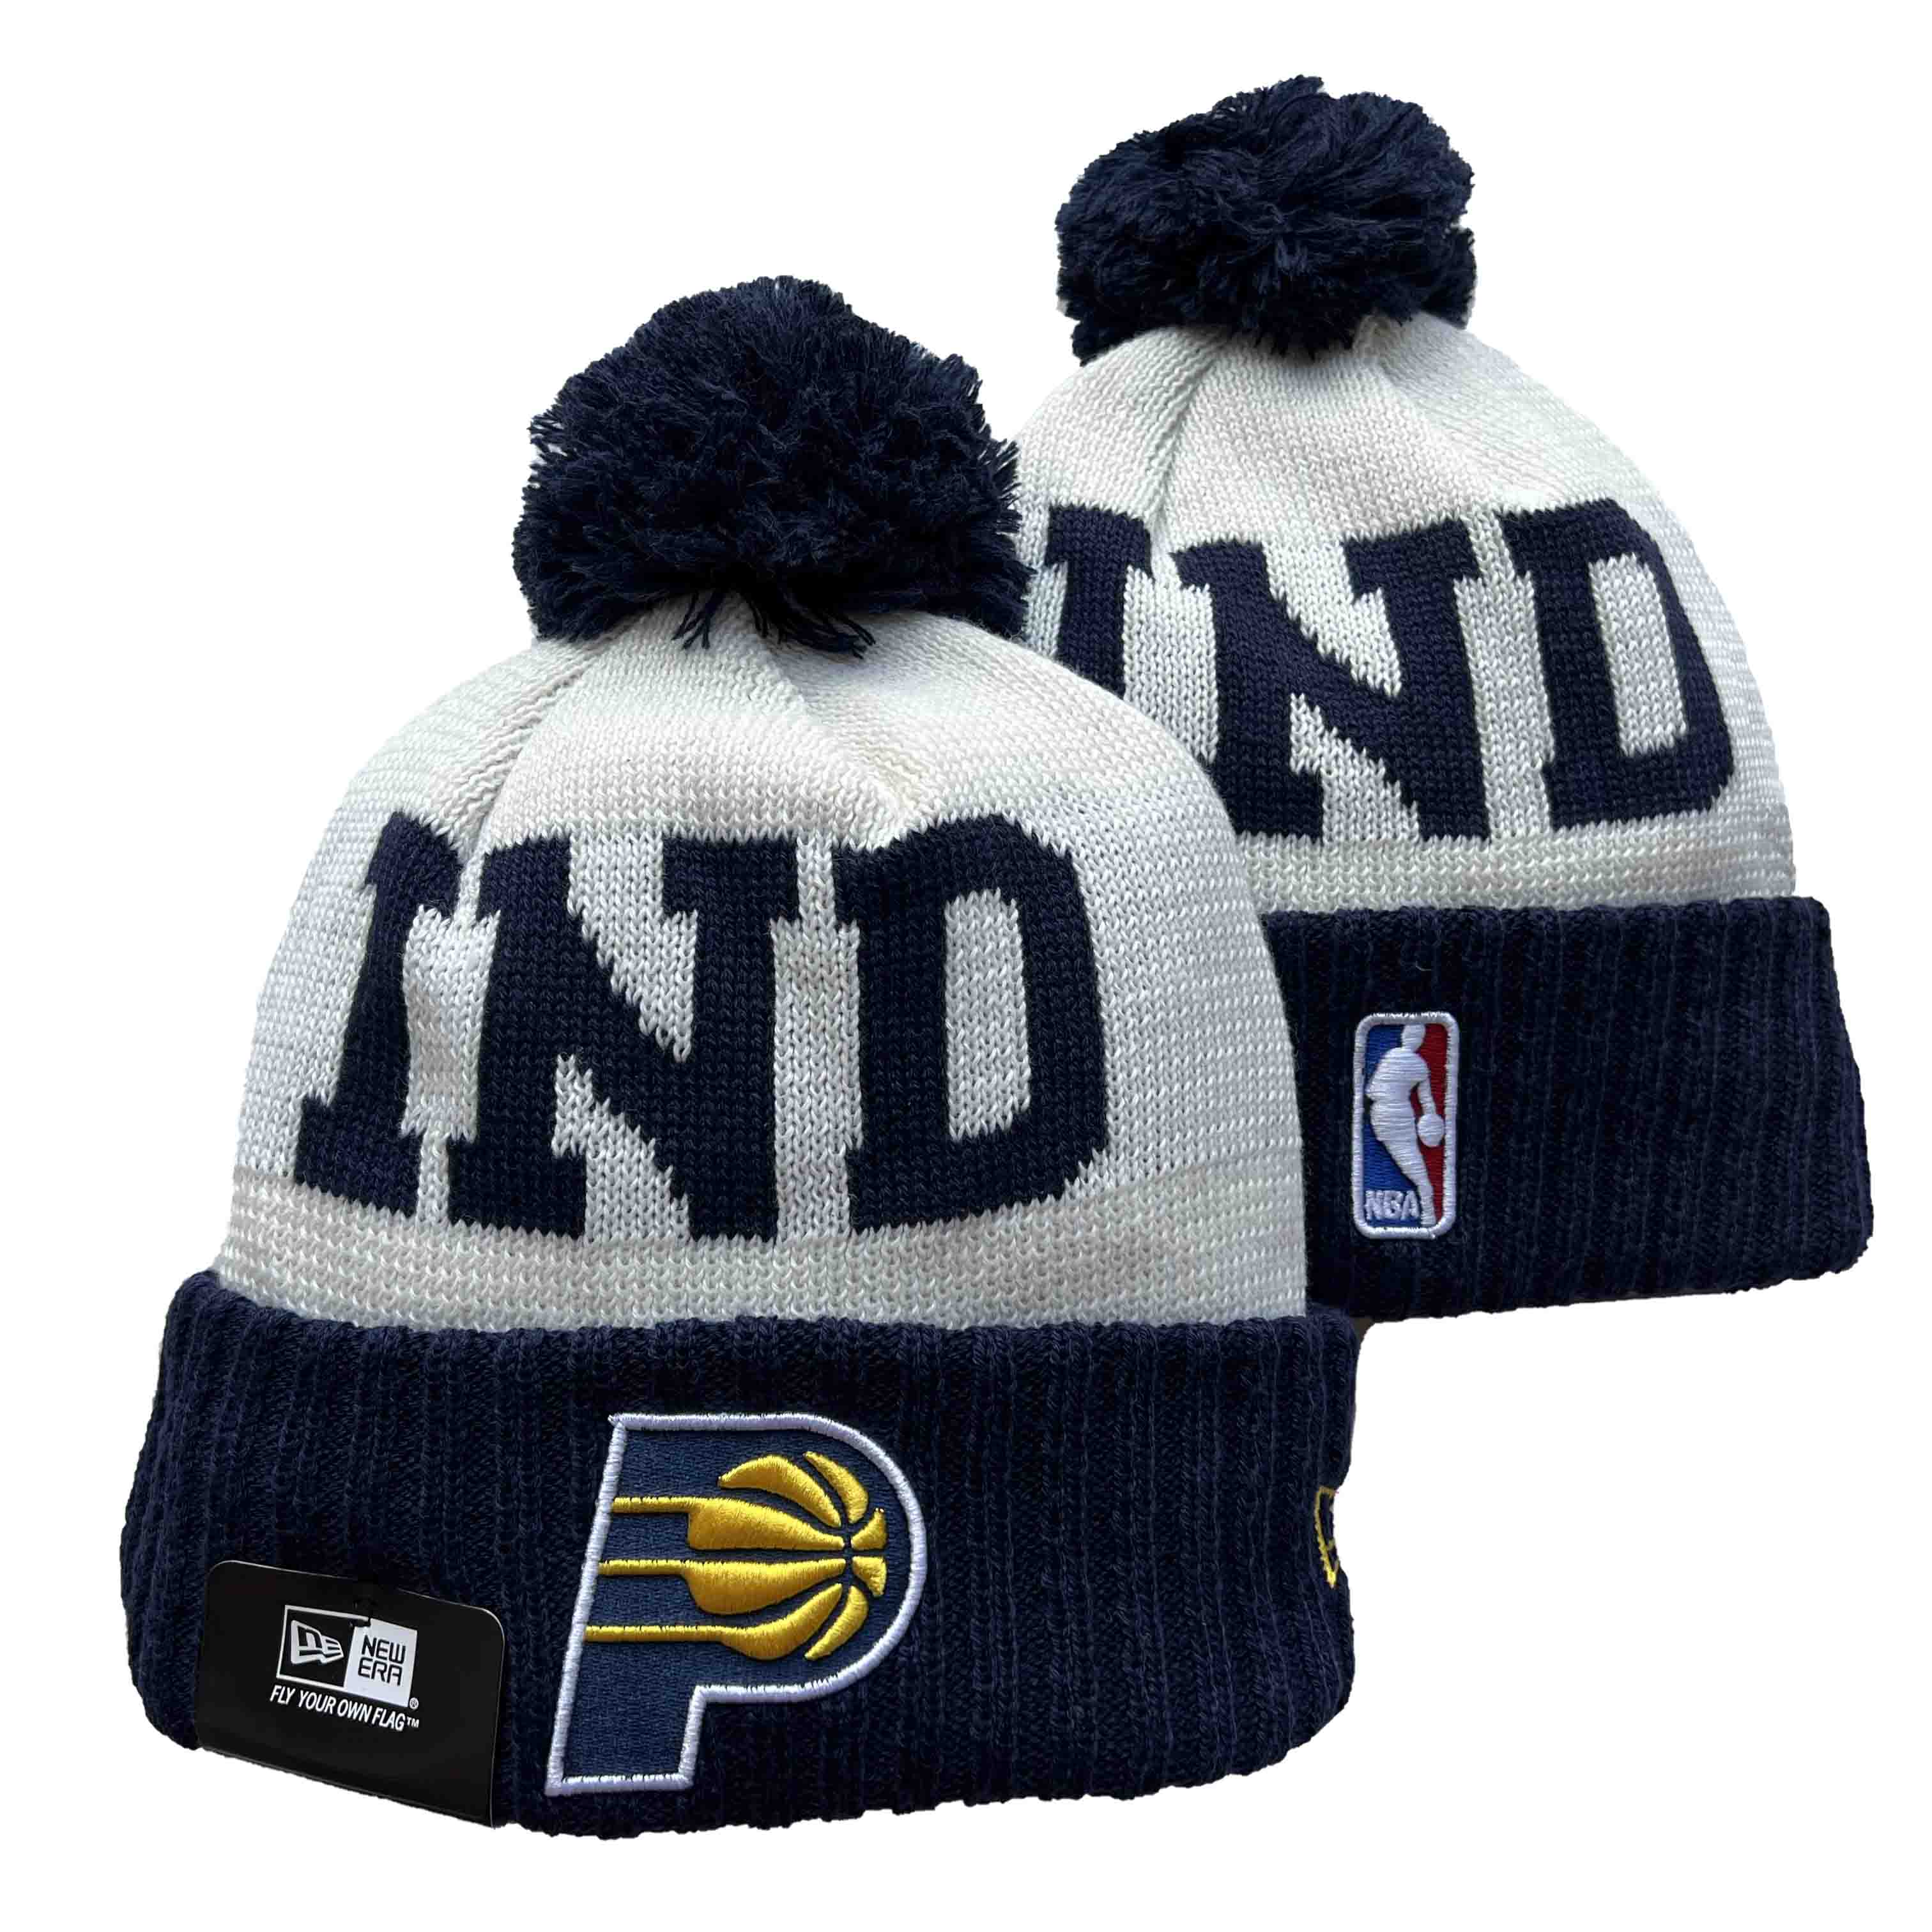 NBA Indiana Pacers Beanies Knit Hats-YD499